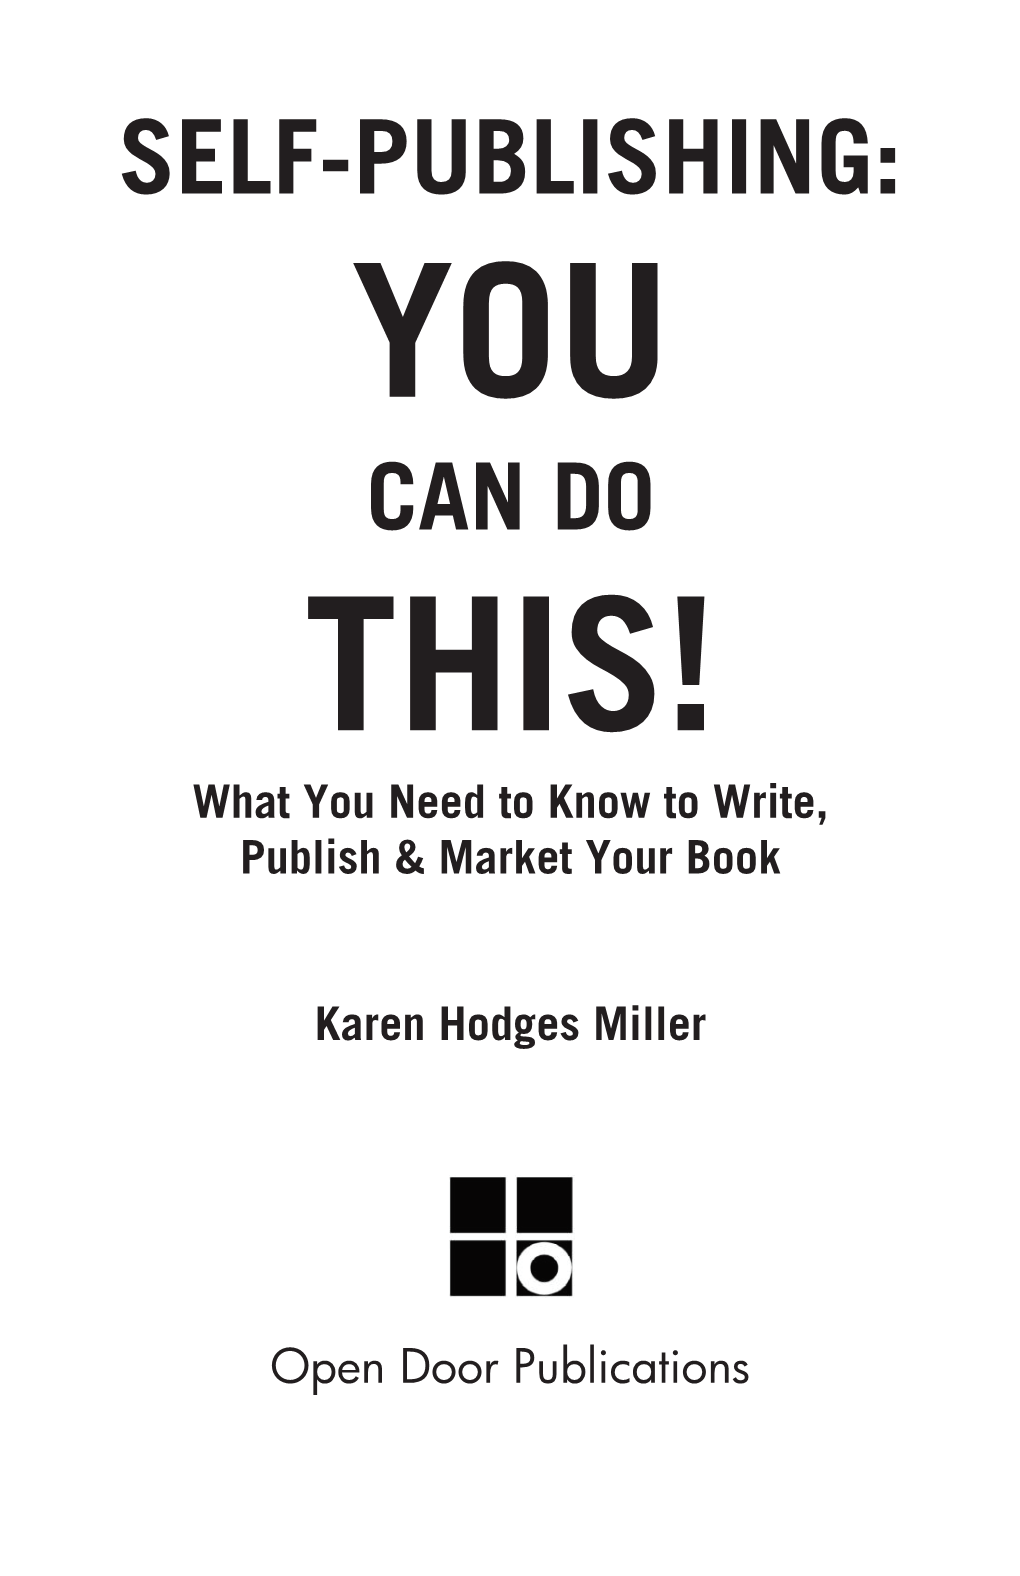 SELF-PUBLISHING: YOU CAN DO THIS! What You Need to Know to Write, Publish & Market Your Book